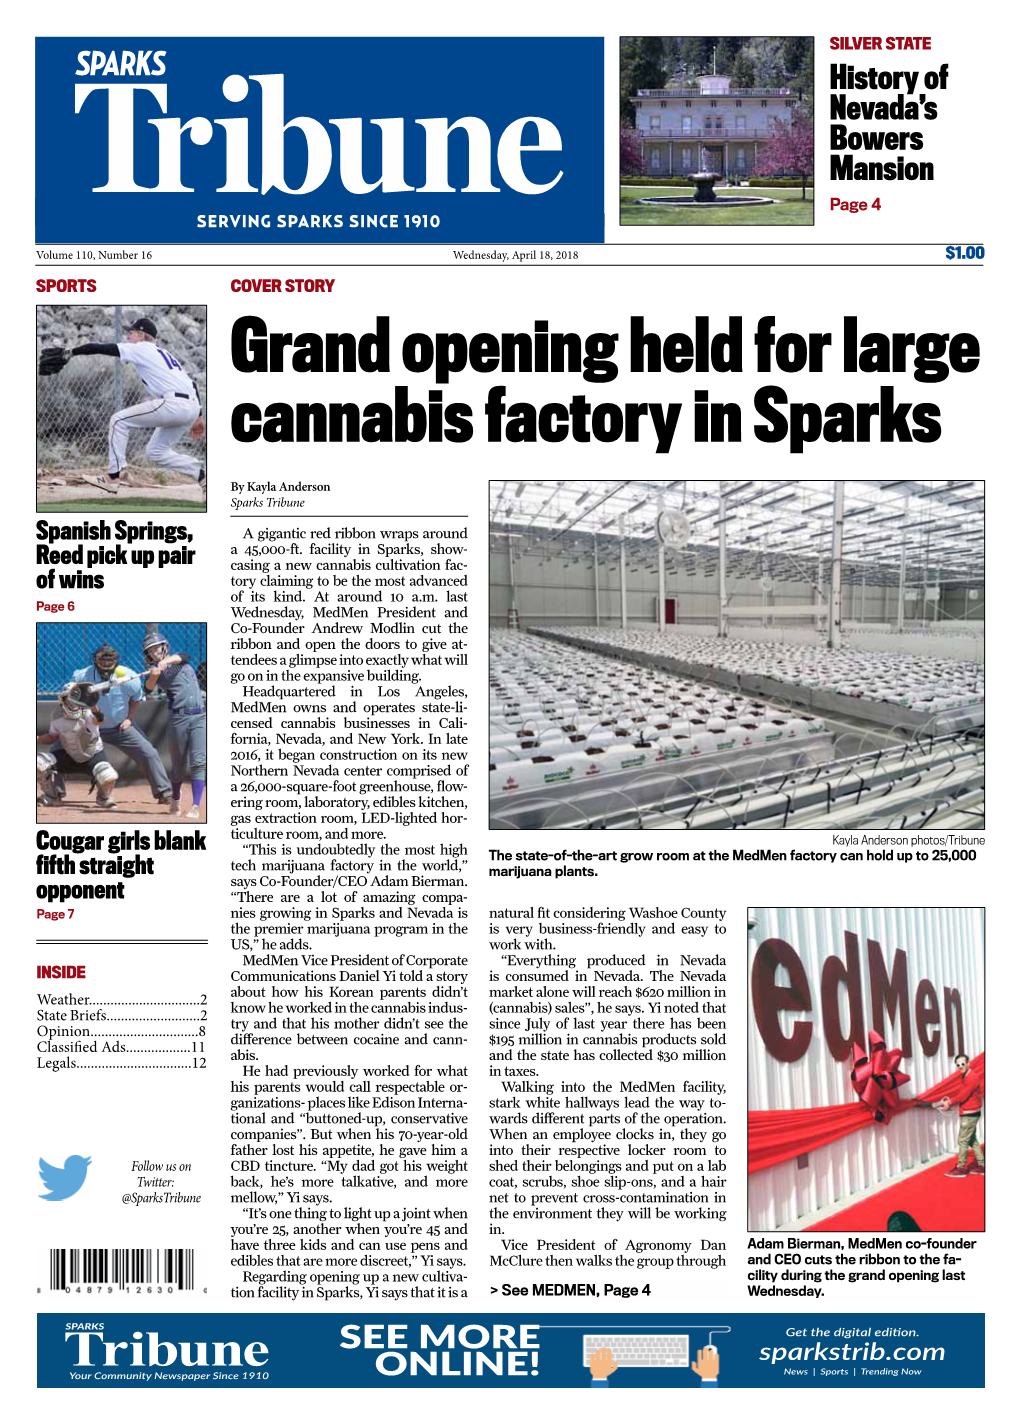 Grand Opening Held for Large Cannabis Factory in Sparks